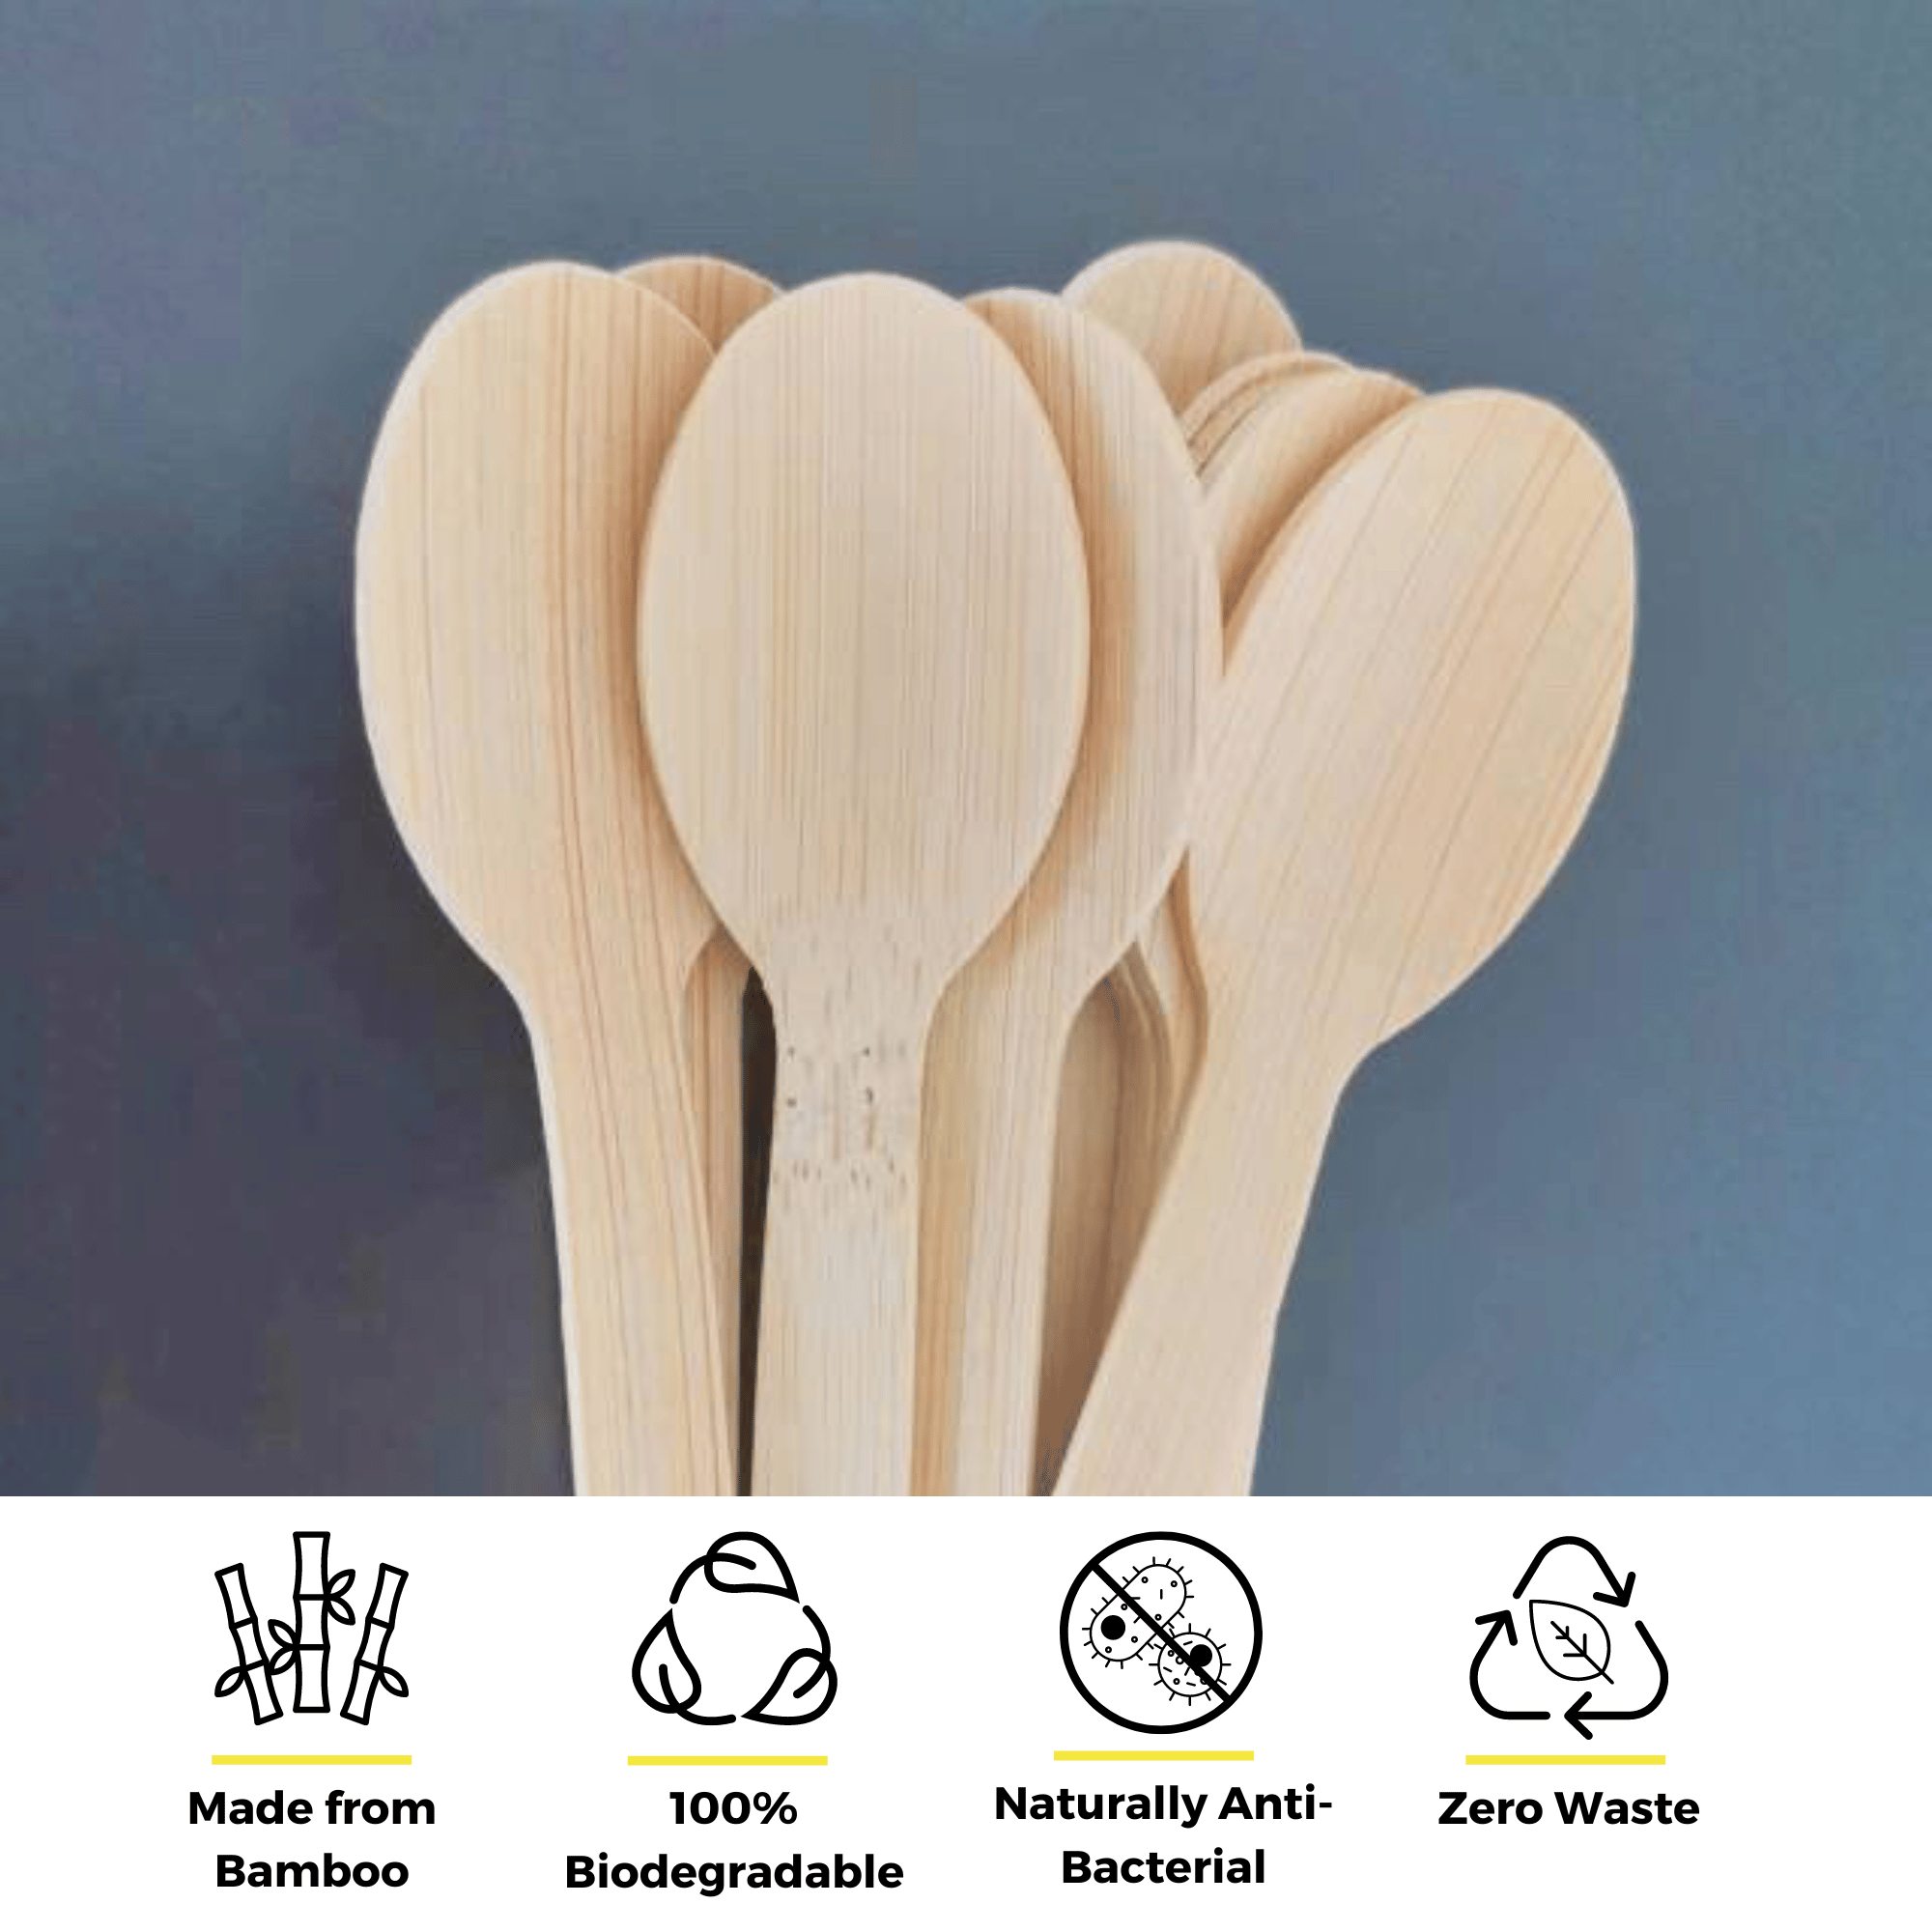 A bundle of bamboo spoons by Holy City Straw Co. grouped together on a dark background, showcasing the product's smooth, natural texture. Accompanying eco-friendly feature icons below highlight that the spoons are Made from Bamboo, 100% Biodegradable, Naturally Antibacterial, and contribute to Zero Waste.